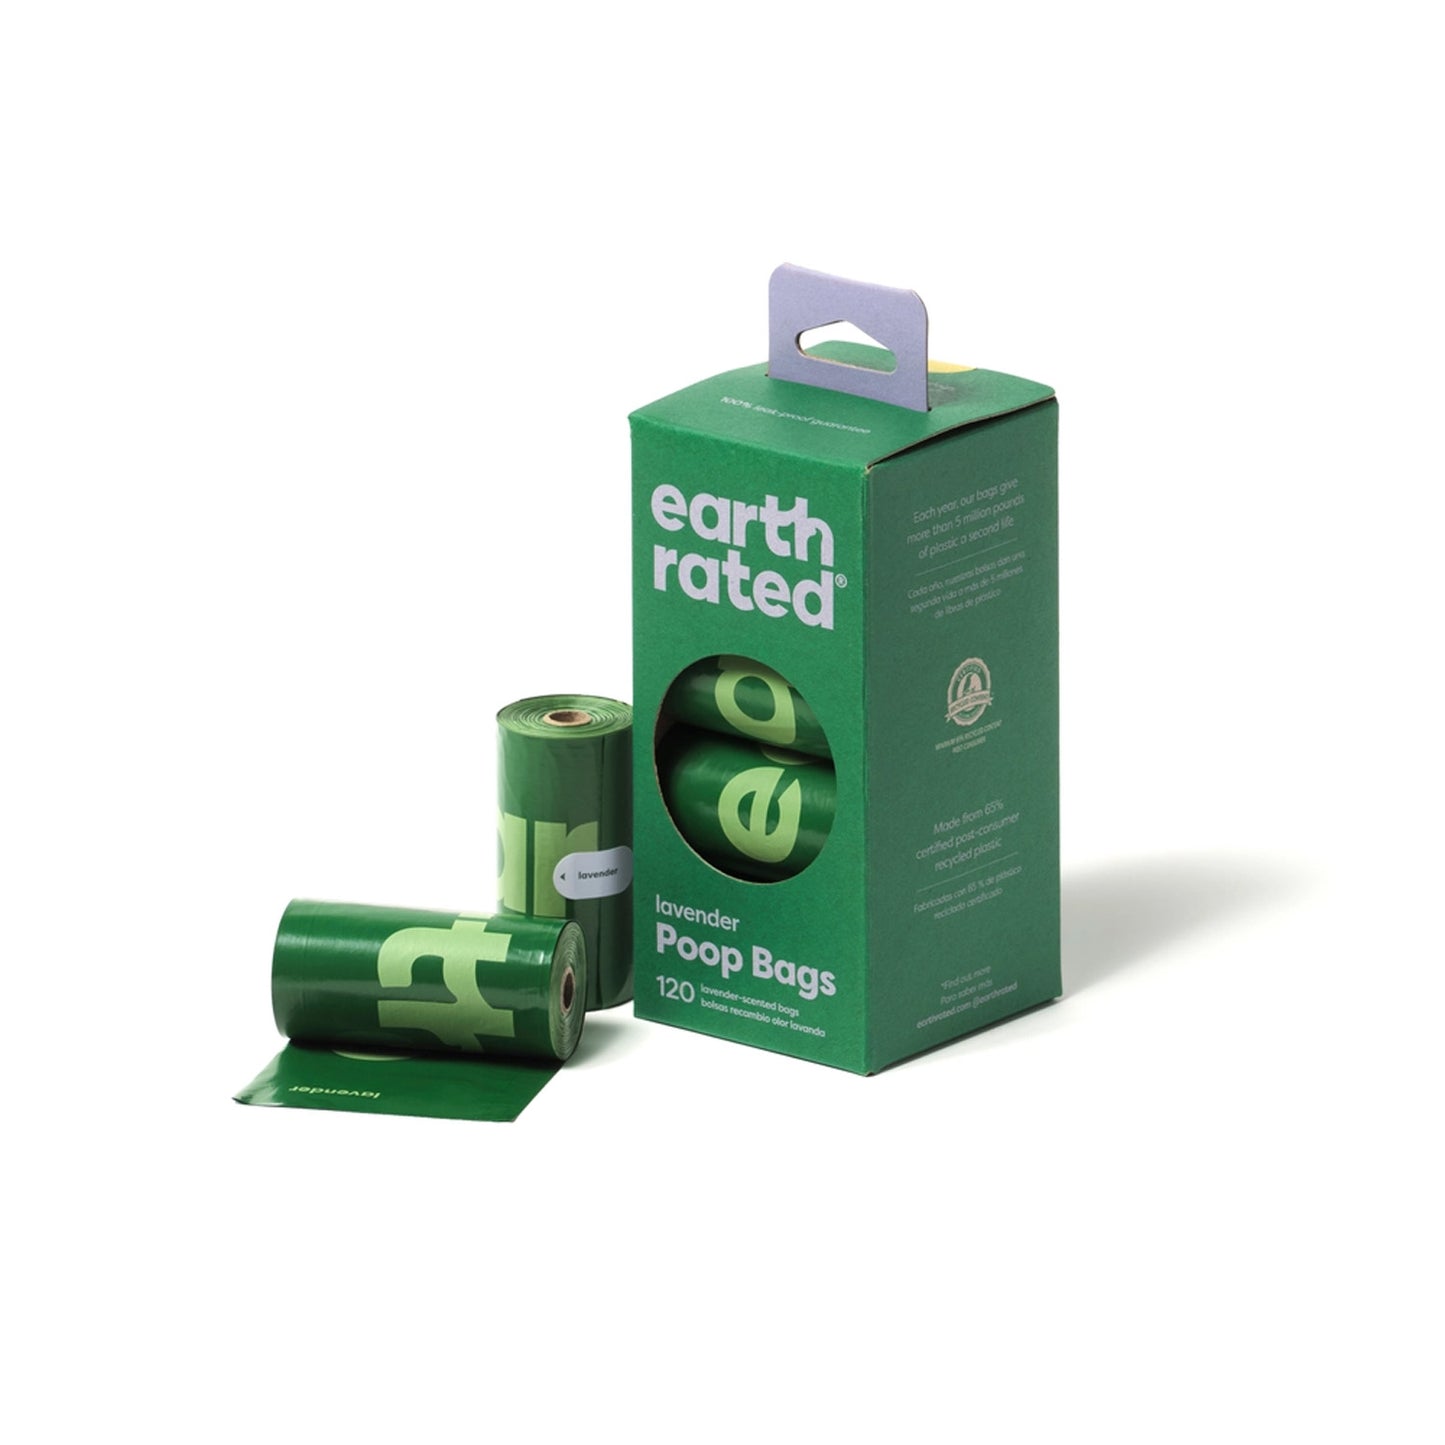 Poop Bags by Earth Rated